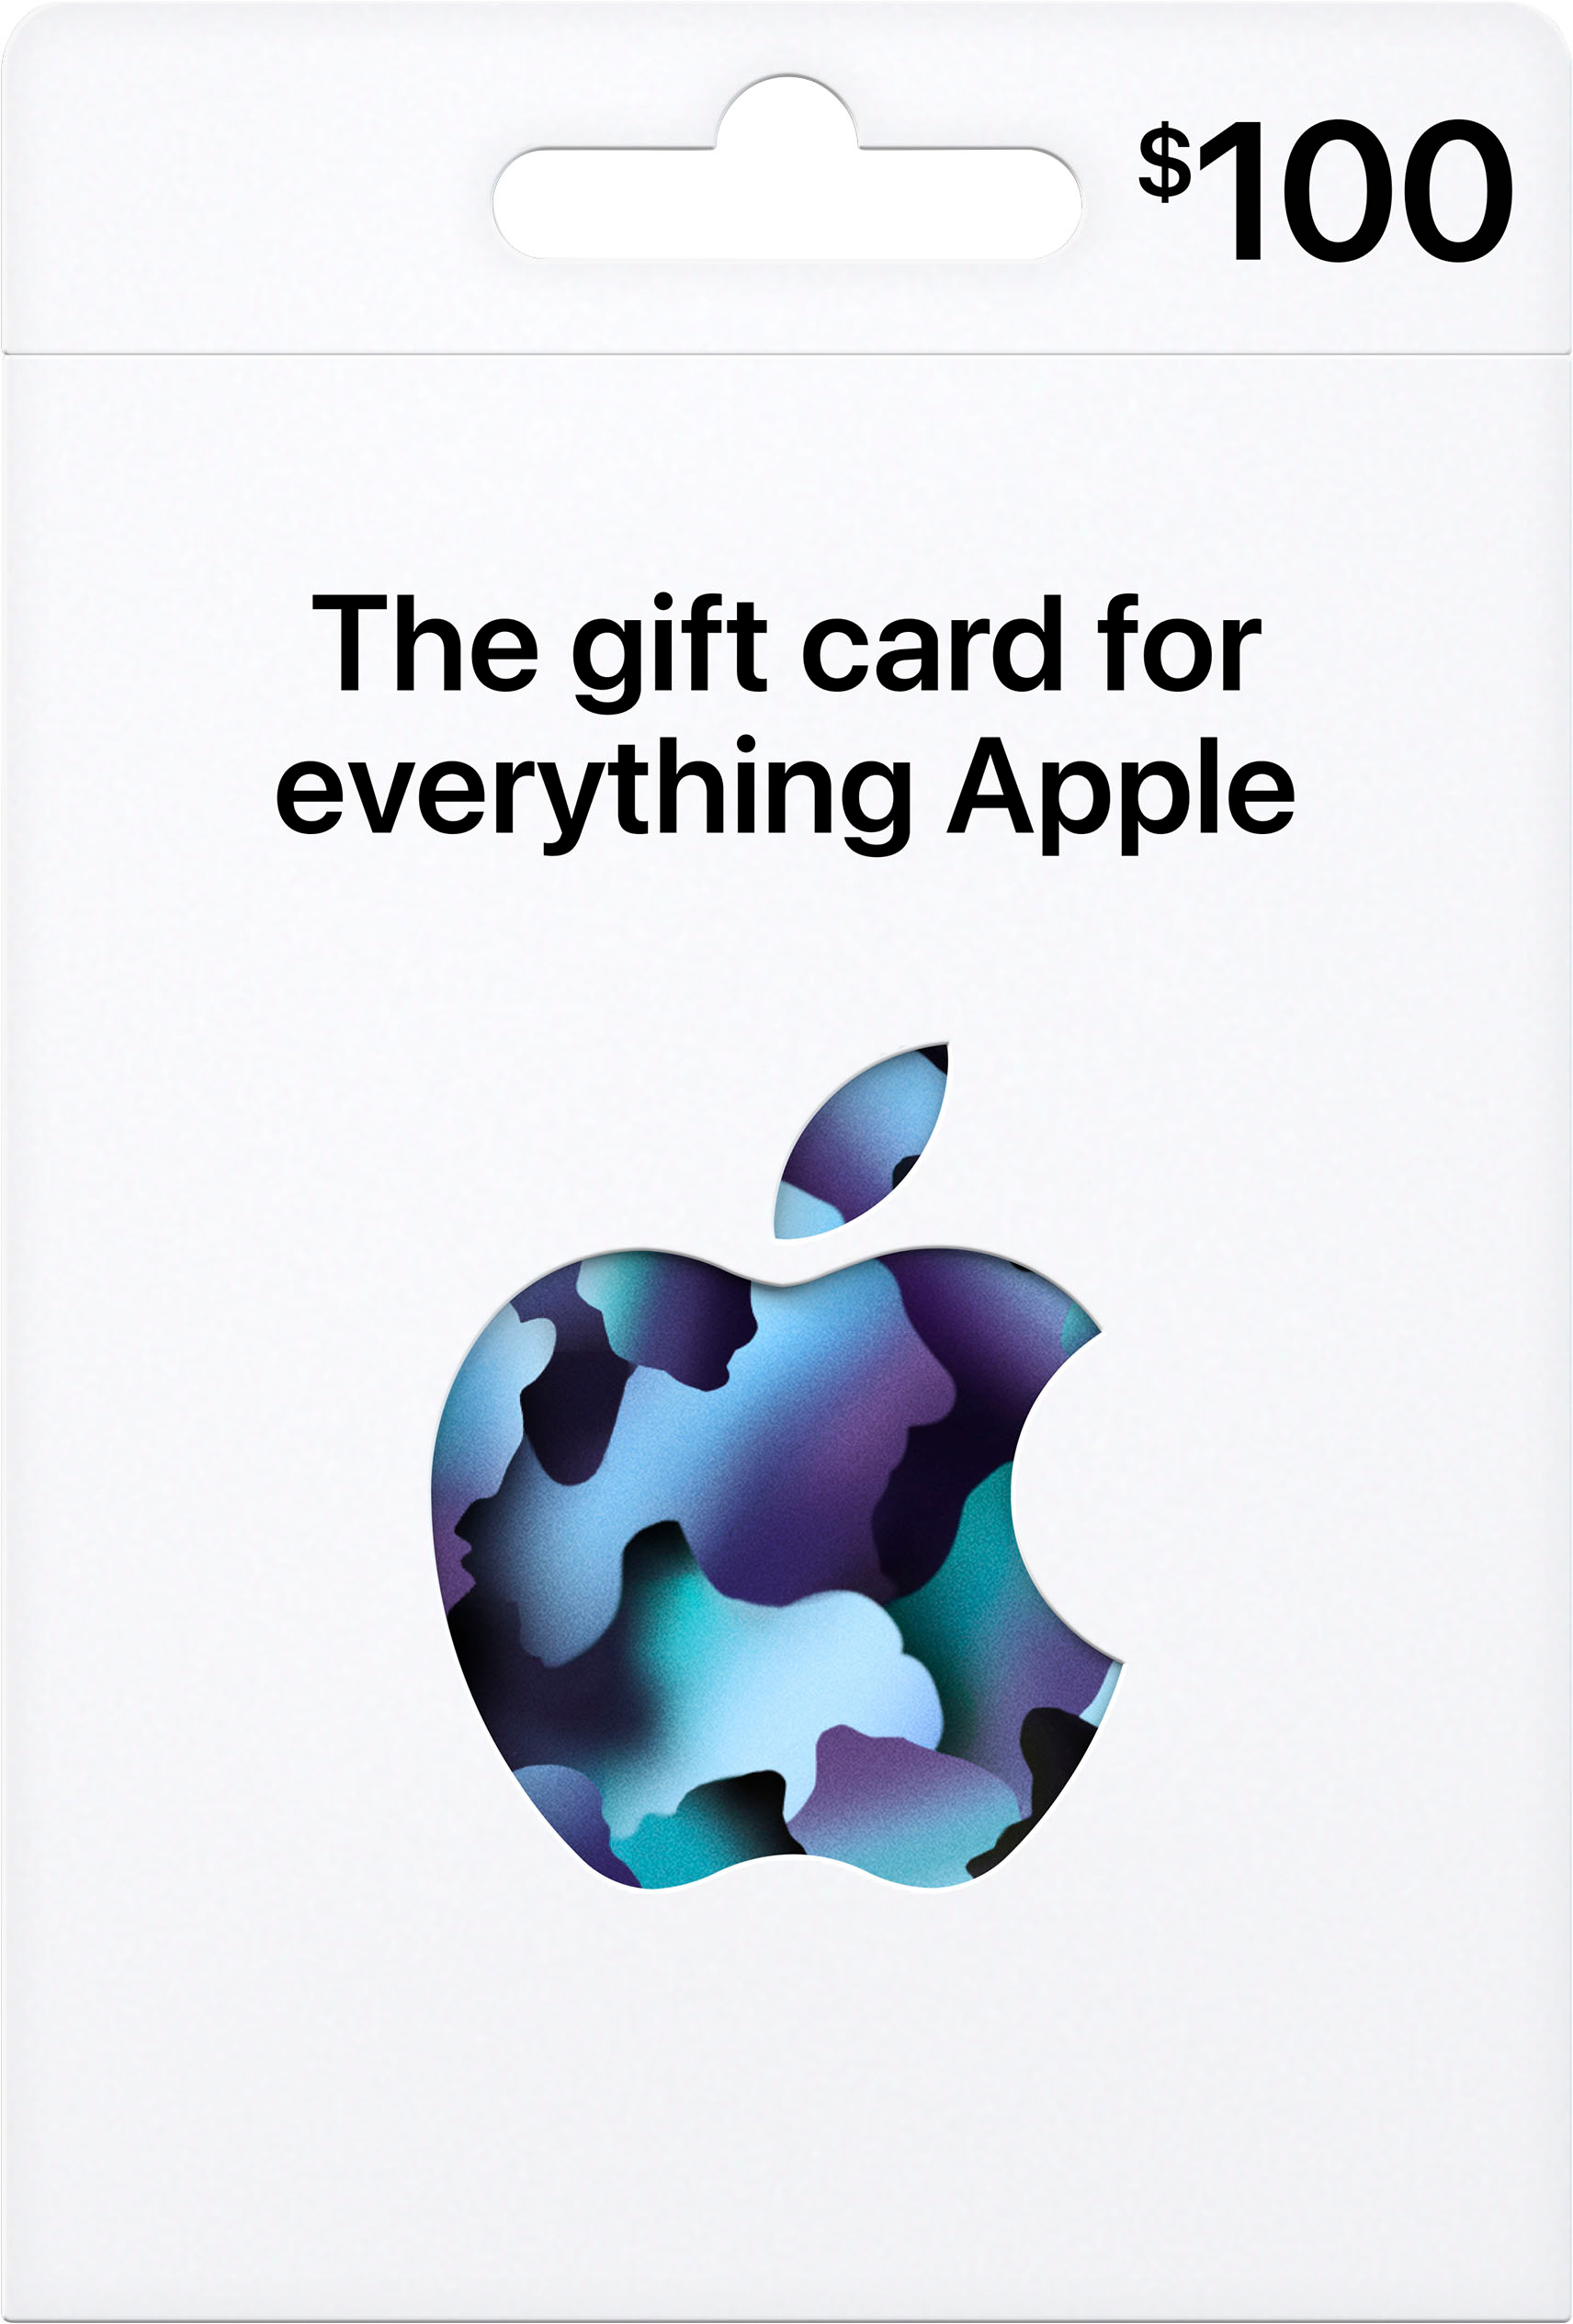 Apple $100 Gift Card App Store, Apple Music, iTunes, iPhone, AirPods, accessories, and more APPLE GIFT CARD $100 Best